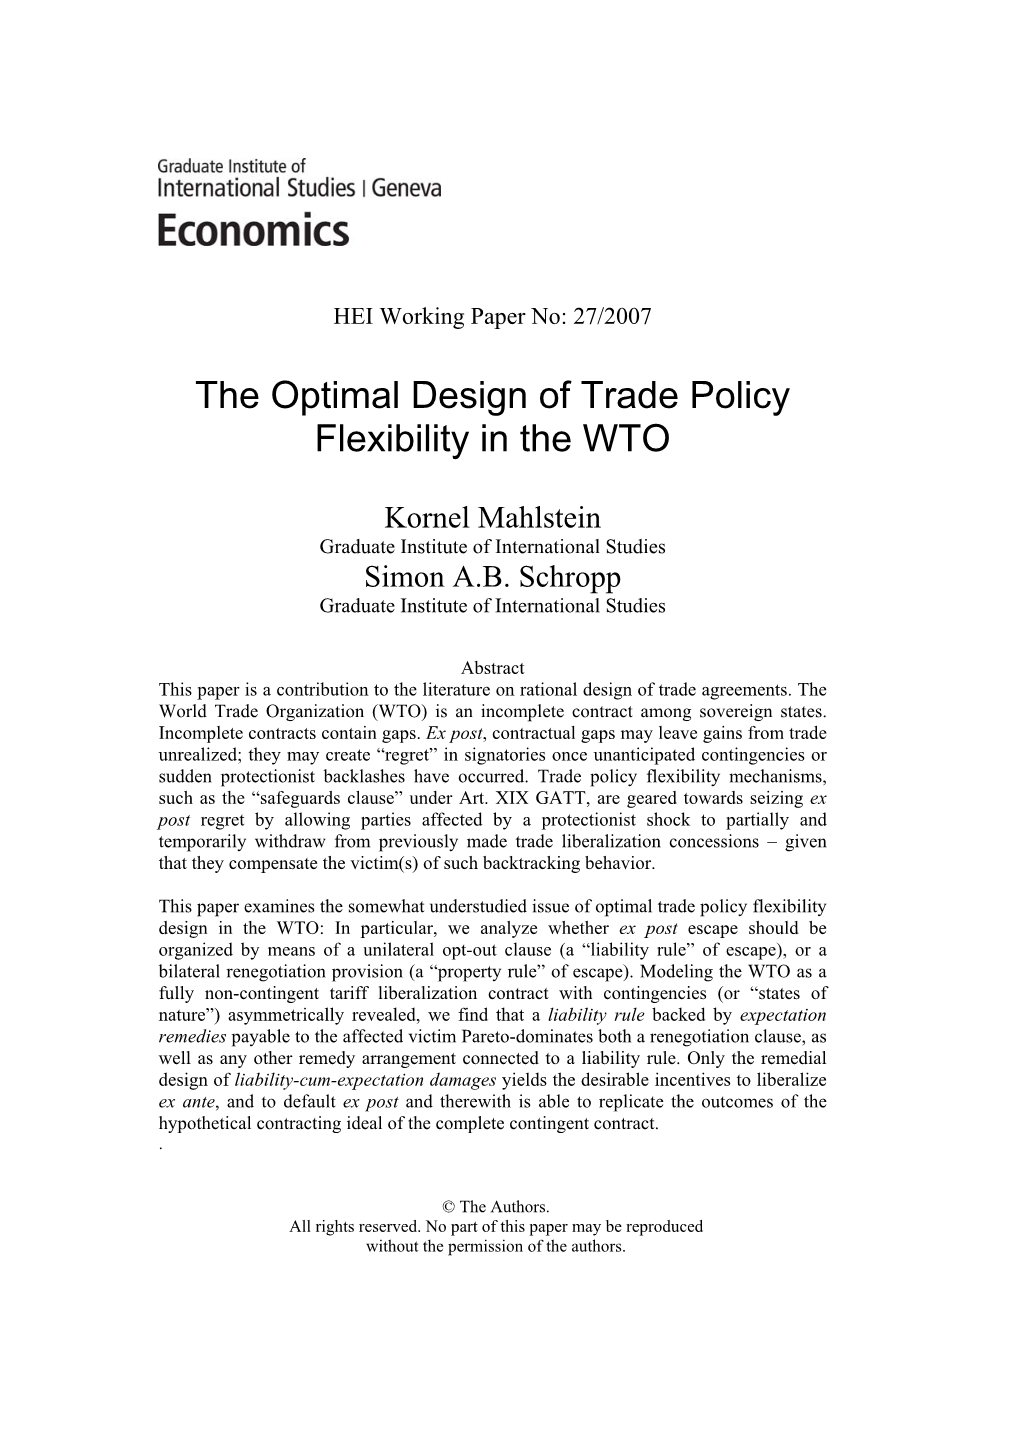 The Optimal Design of Trade Policy Flexibility in the WTO